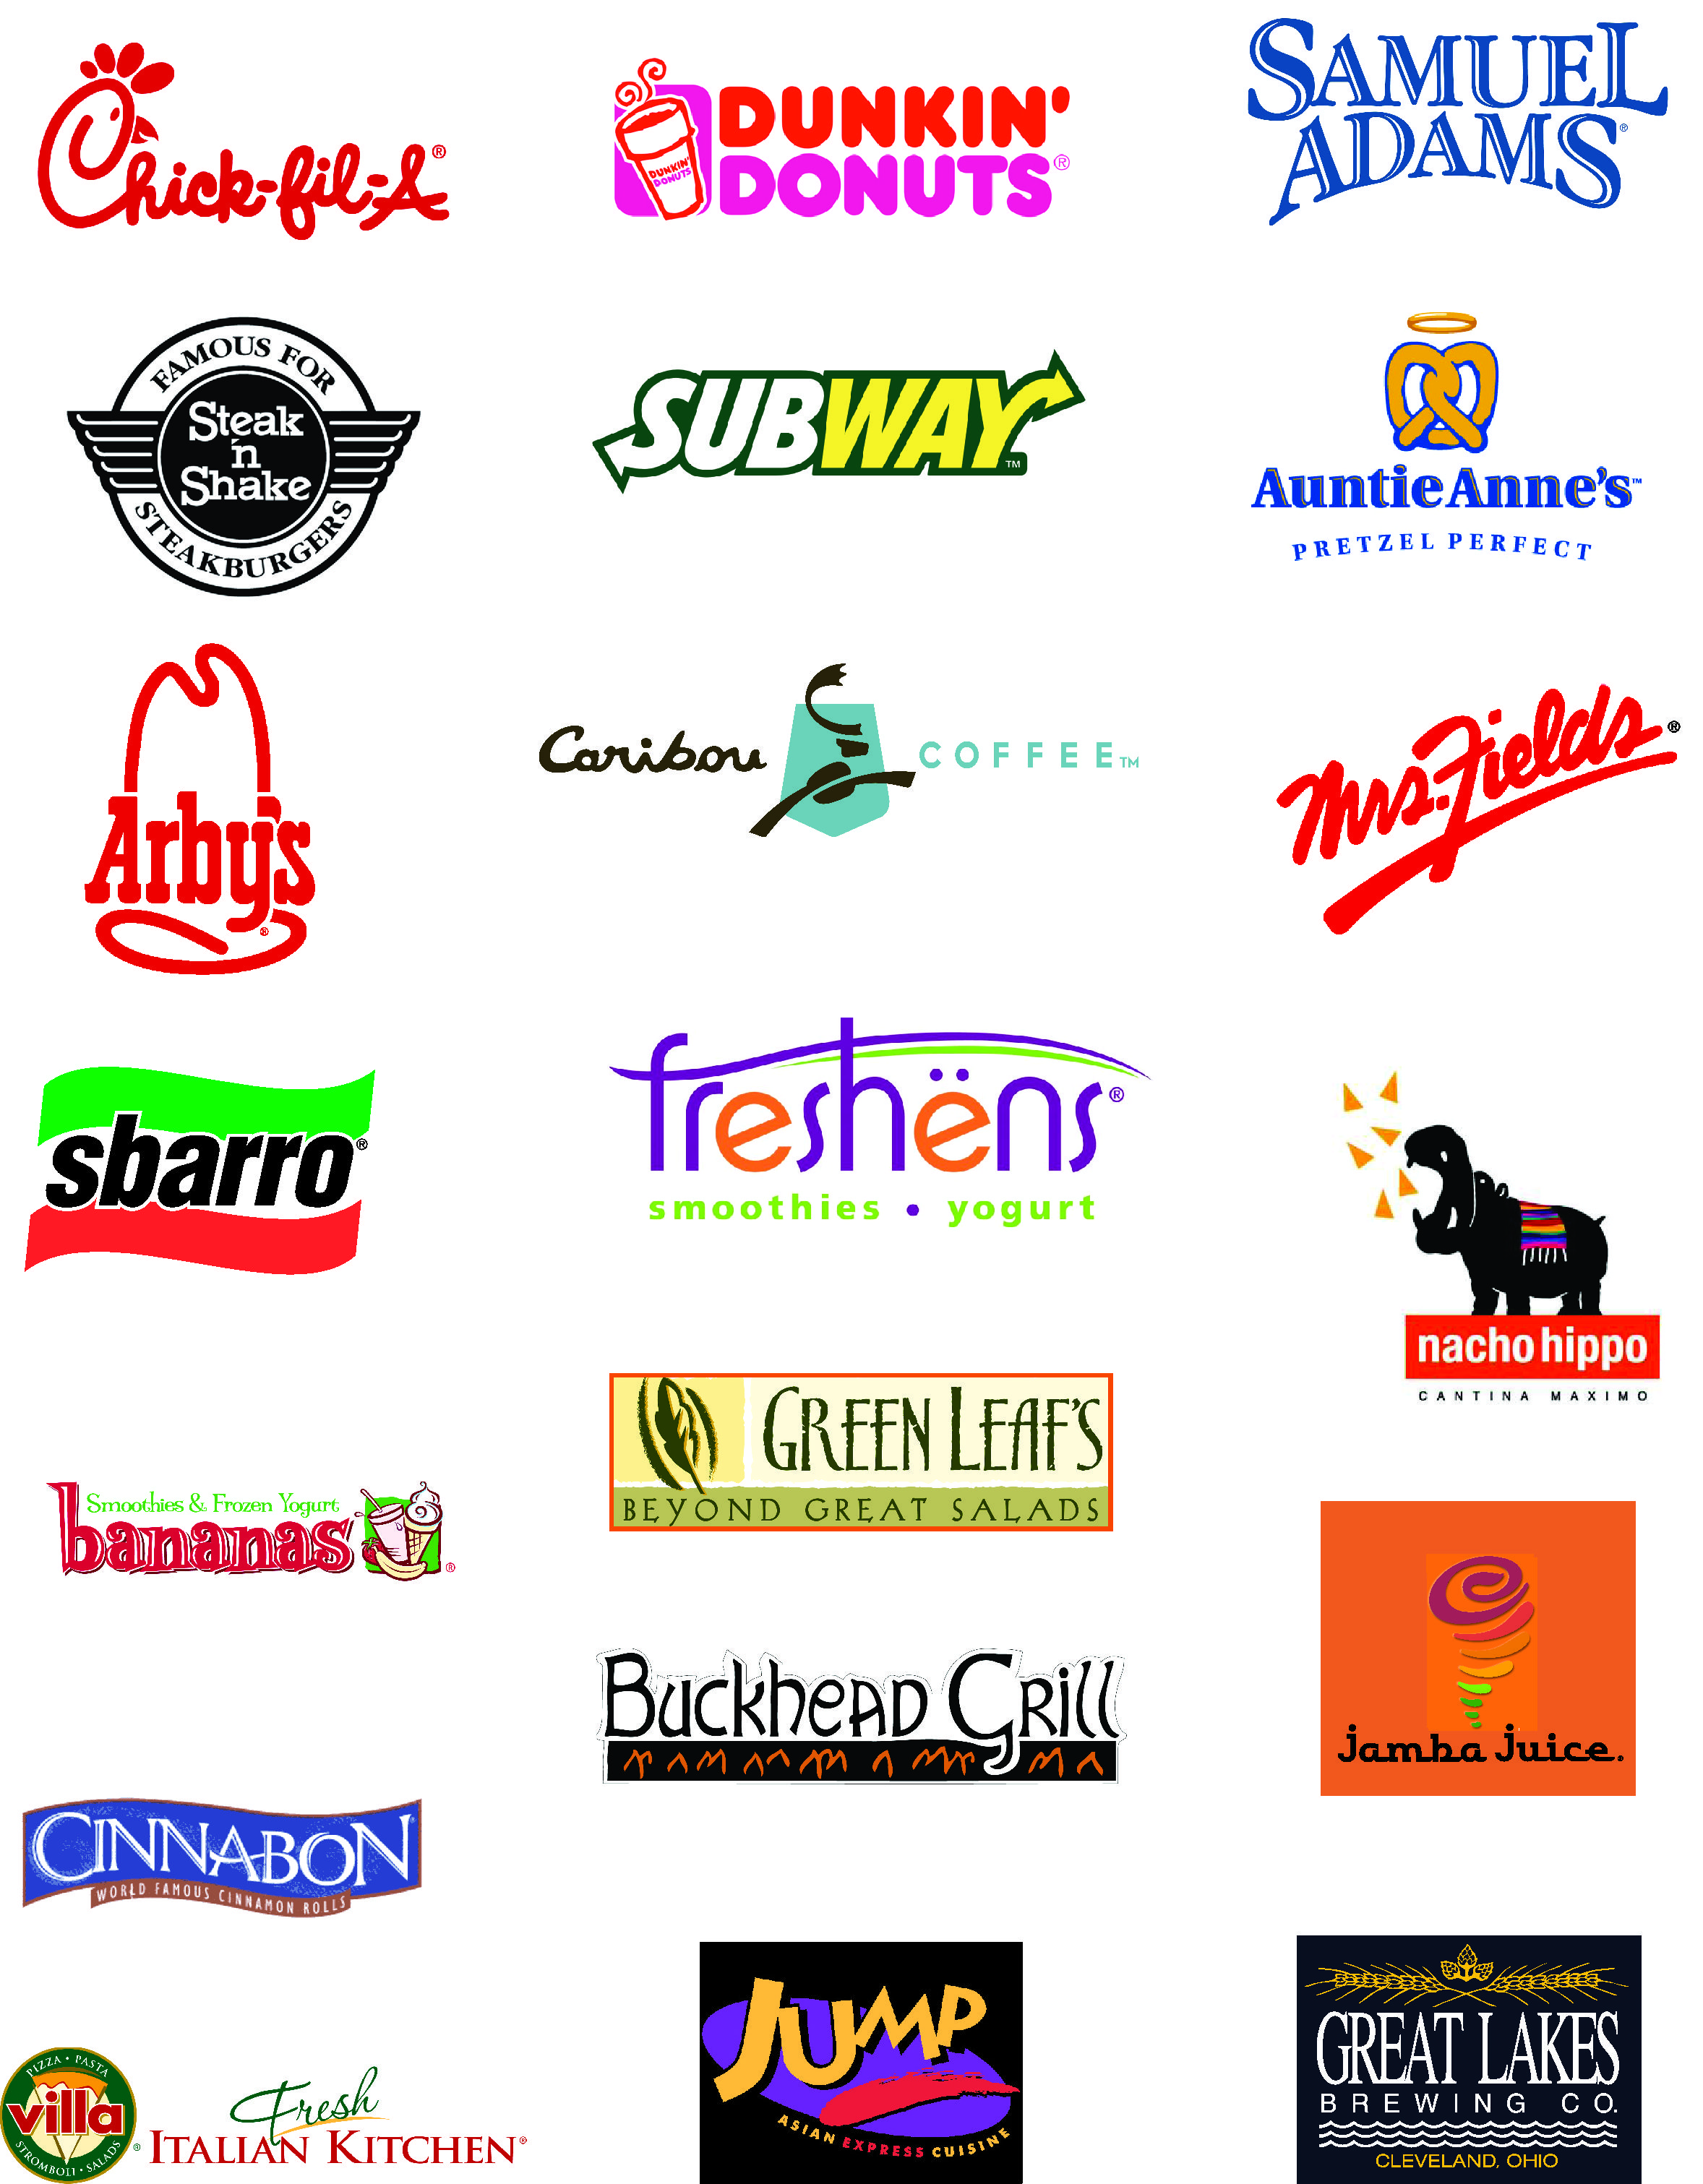 Some of our Brands